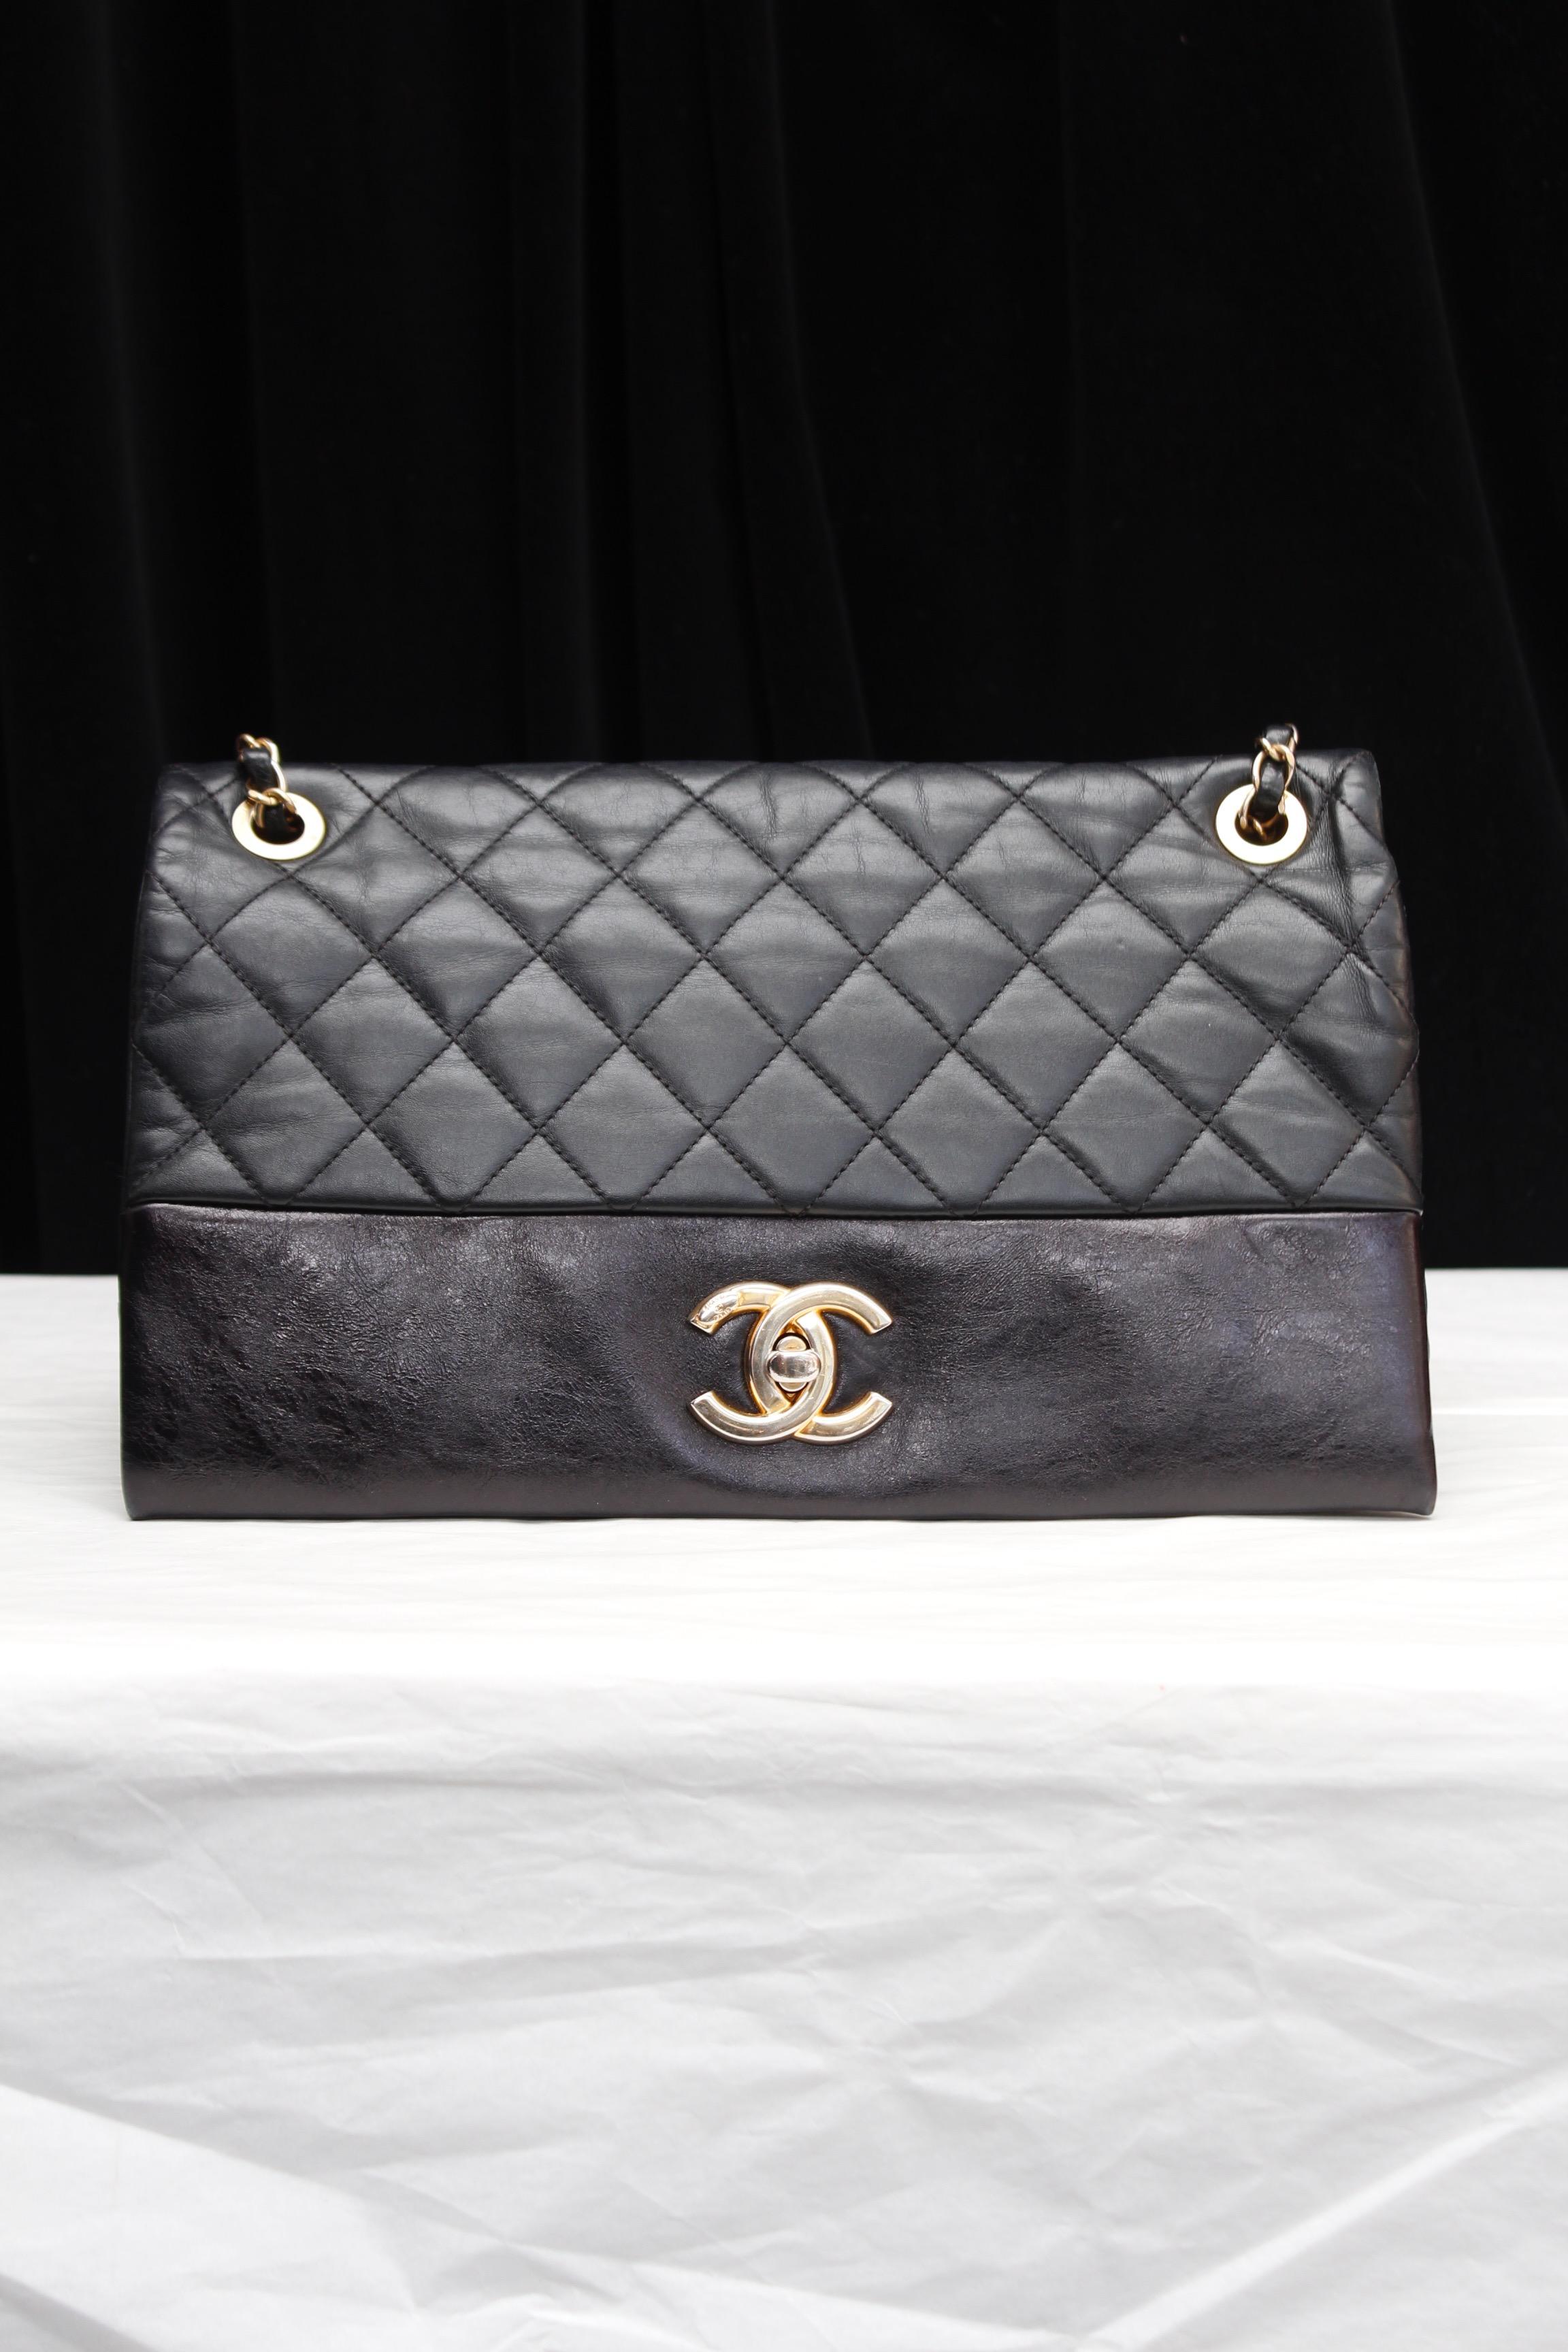 Gray Chanel beautiful smooth and quilted leather bag, 2012/2013 For Sale